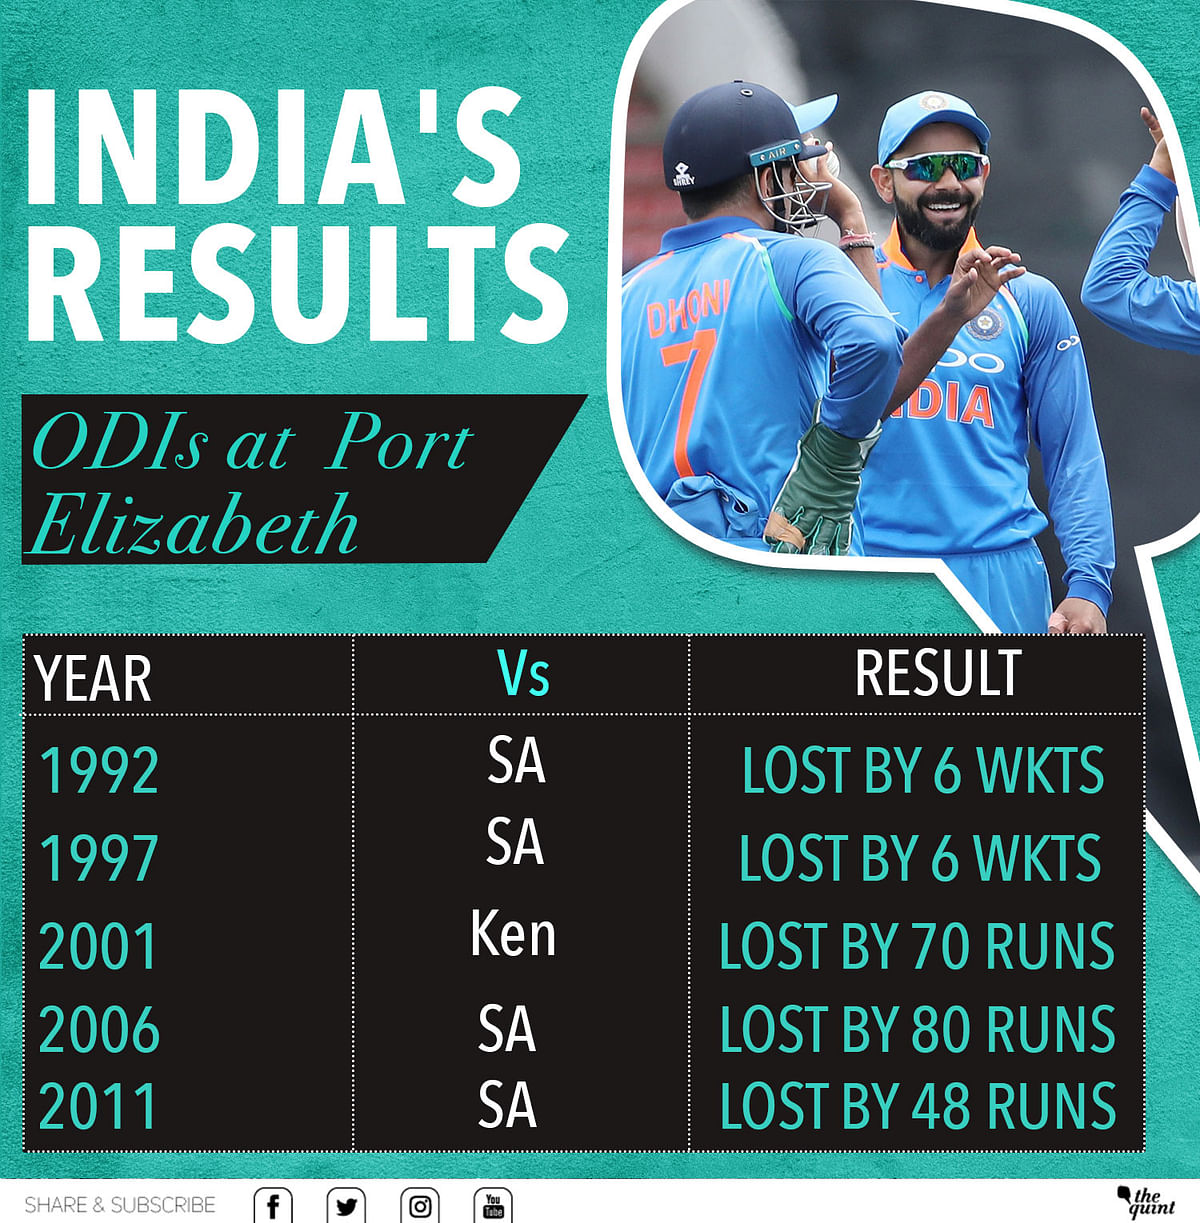 Rohit Sharma has done very little against South Africa – definitely not on this tour, and very little earlier.